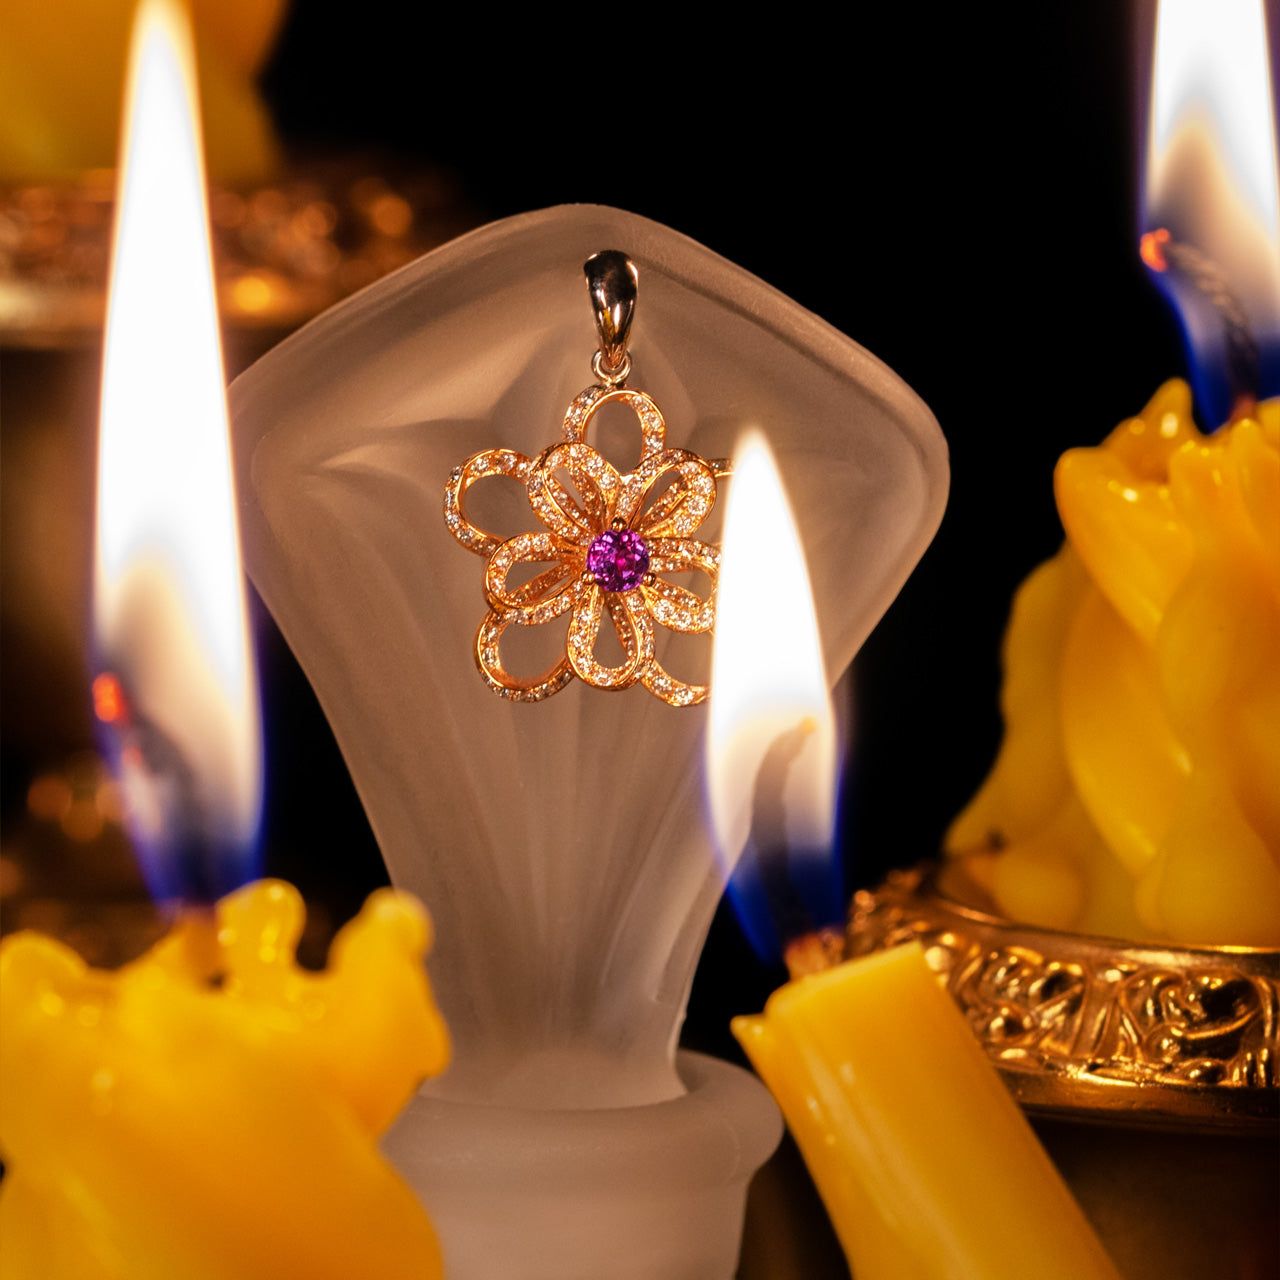 An 18k multitone gold pendant with a 0.18ct natural alexandrite gemstone, displayed beside a candle